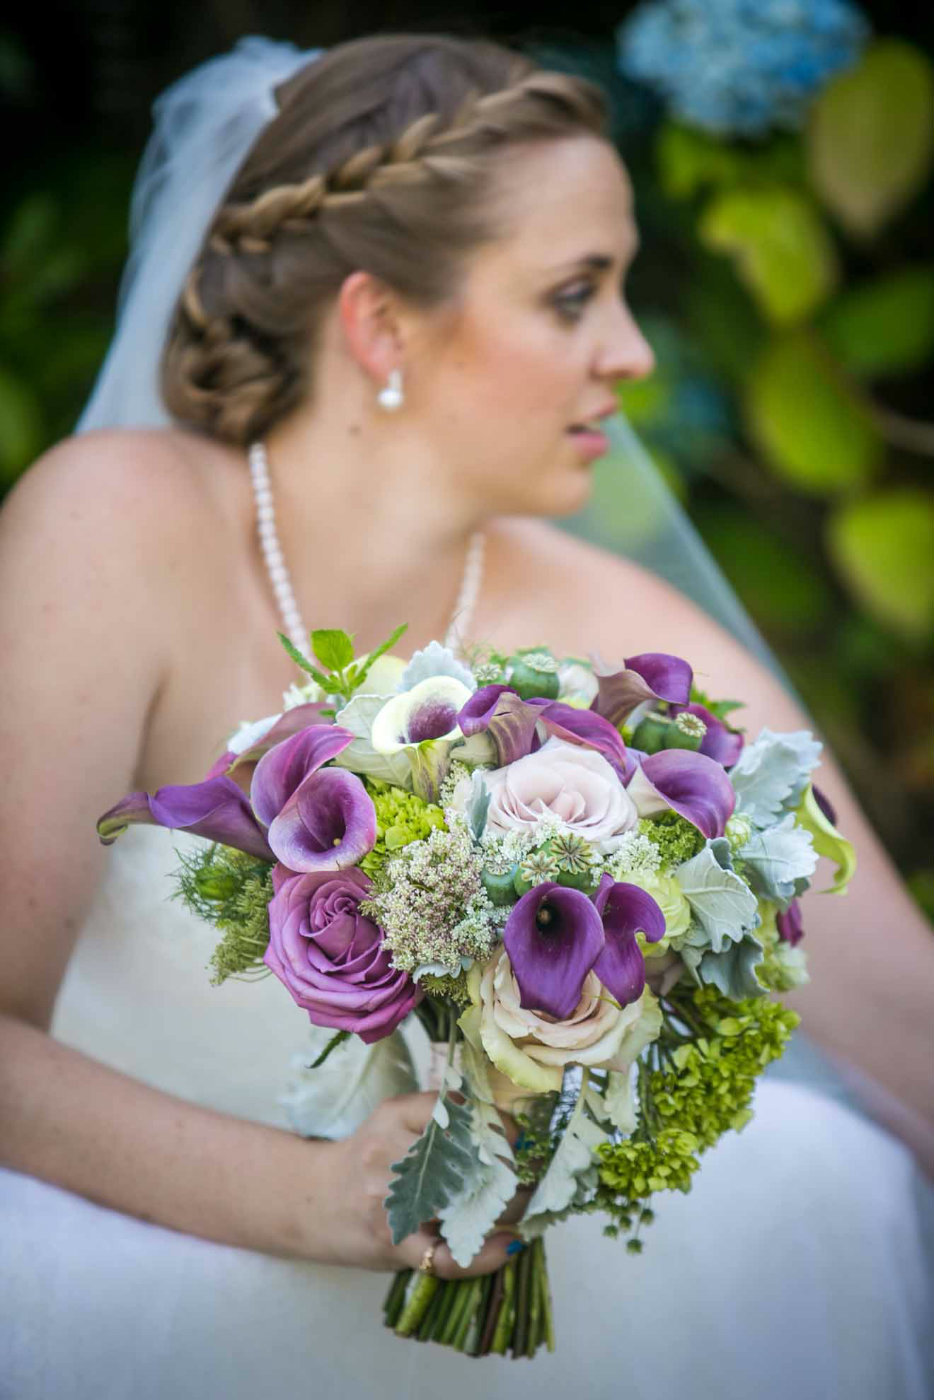 bridal bouquet with purple roses, purple calla lilies, blush roses,and greenery